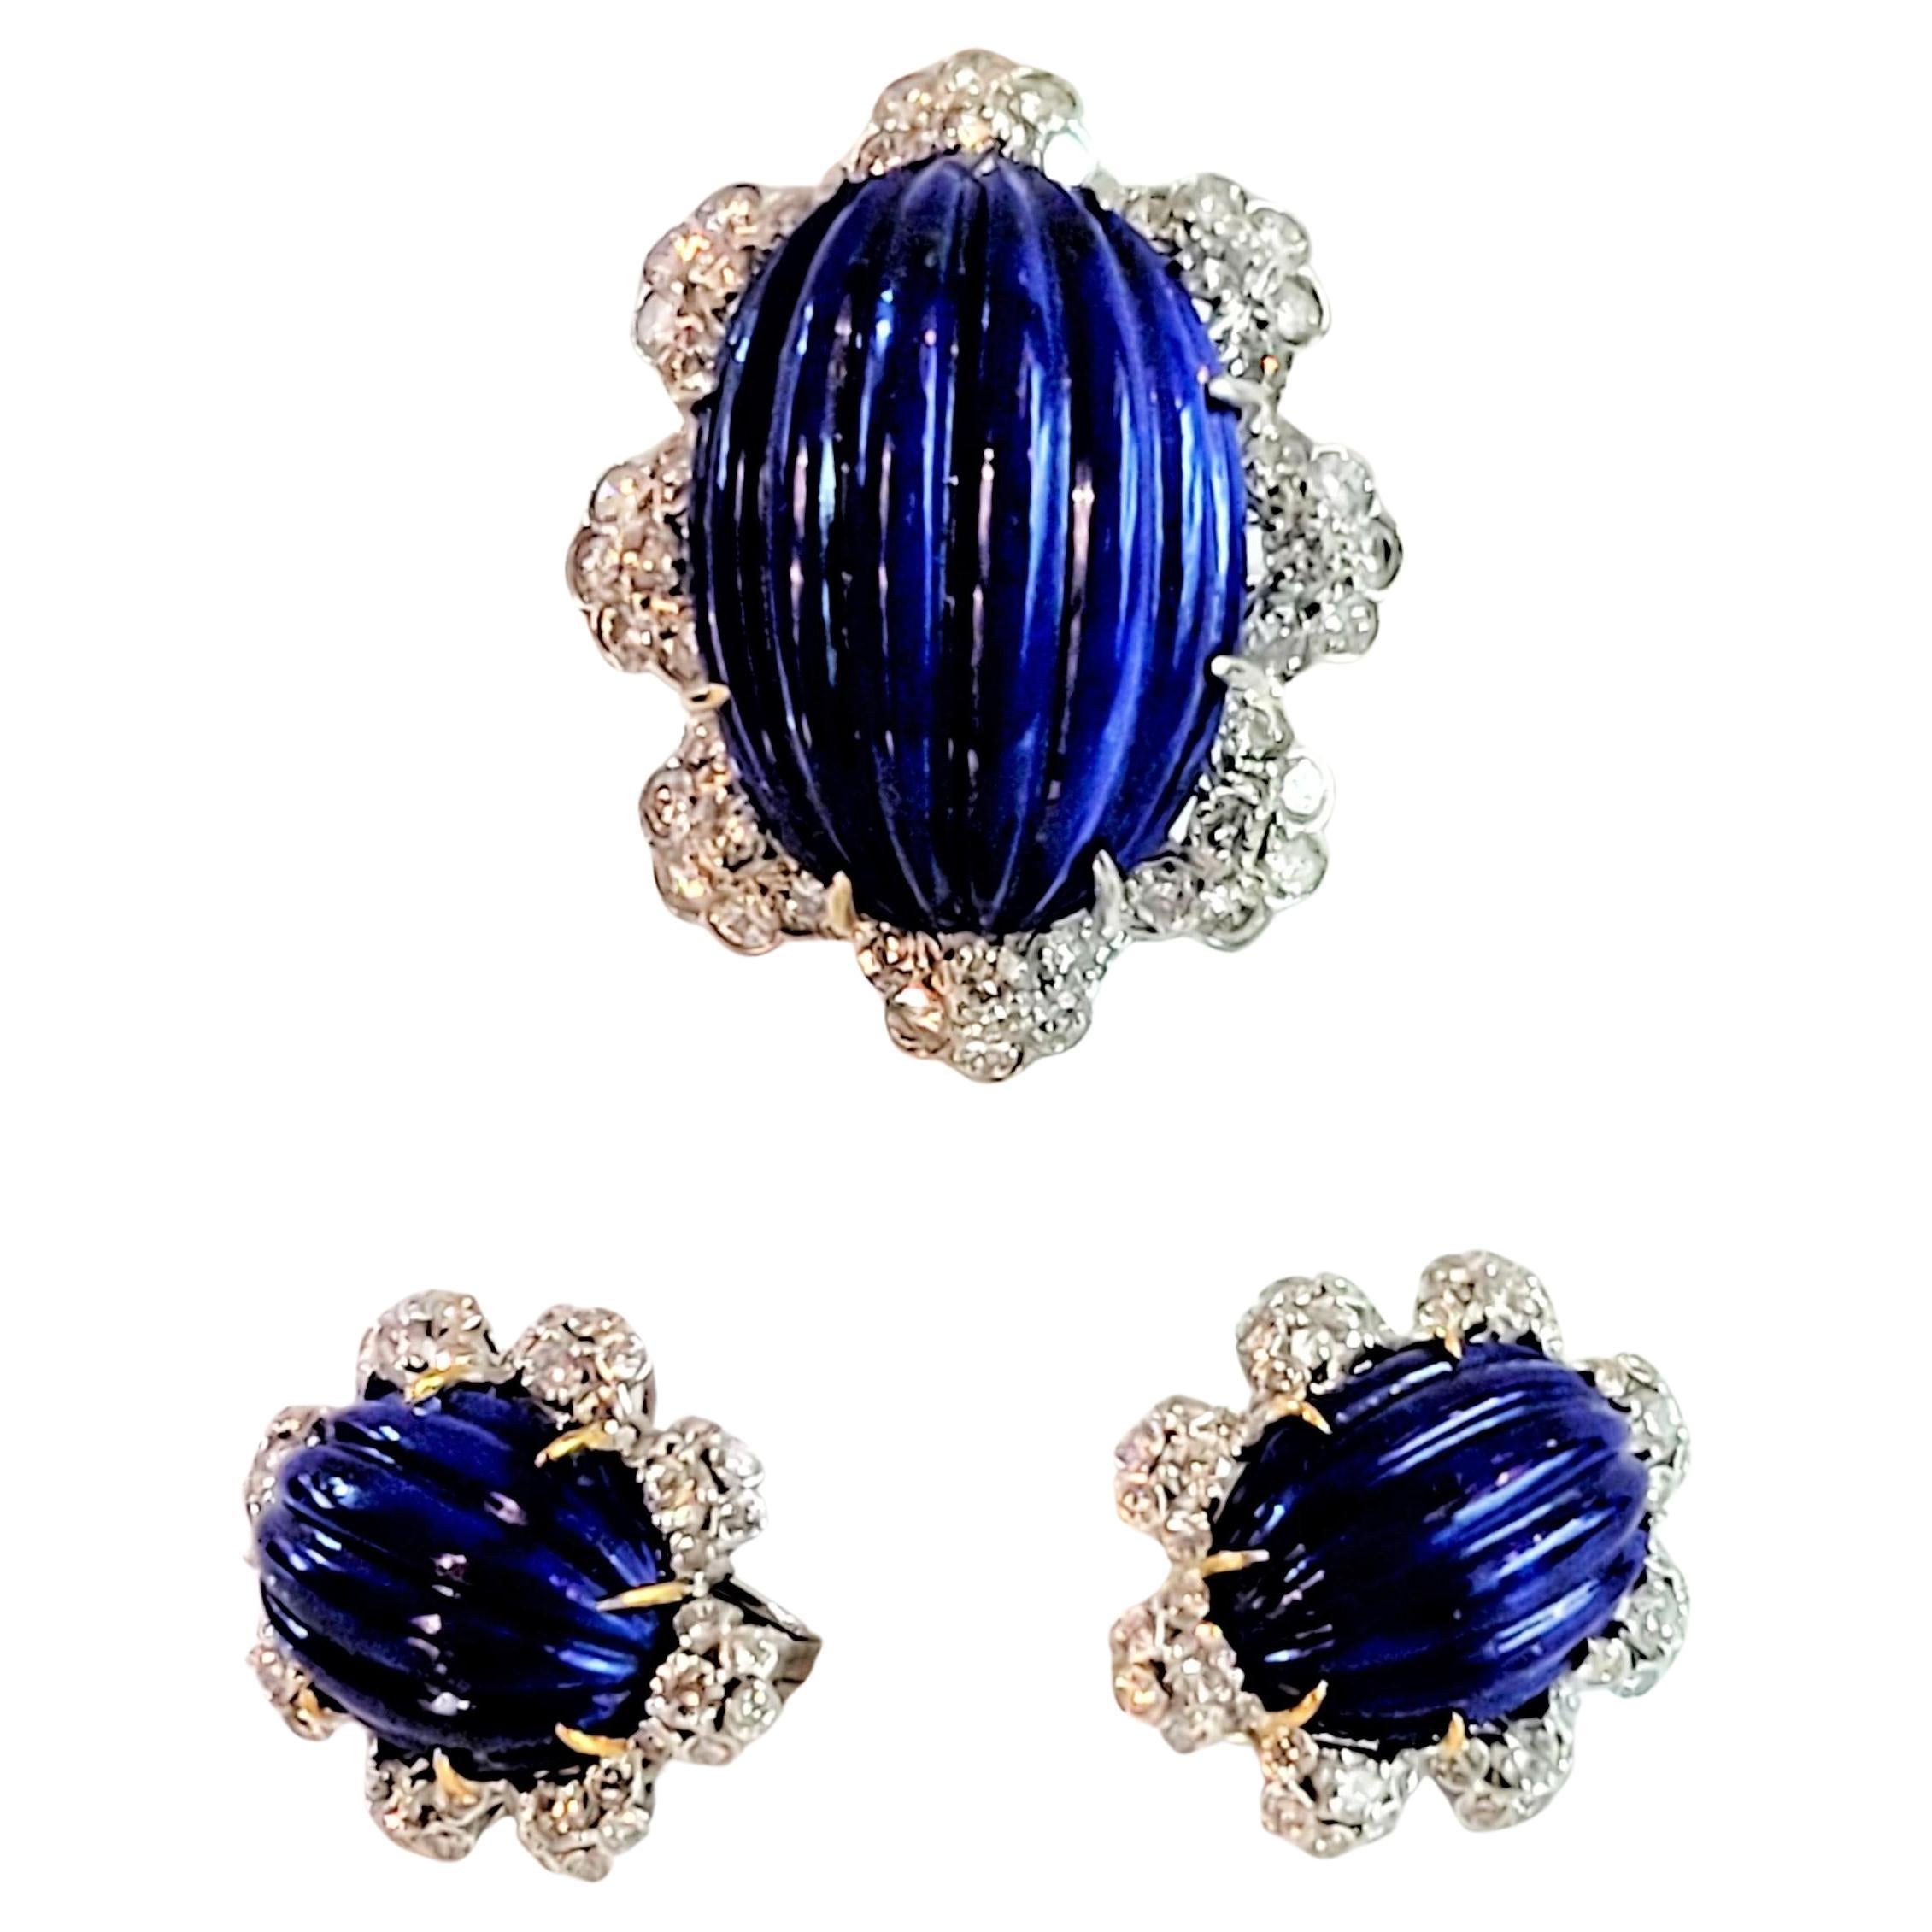 Unique Diamond Lapis Lazuli Ring & Earrings in Gold For Sale